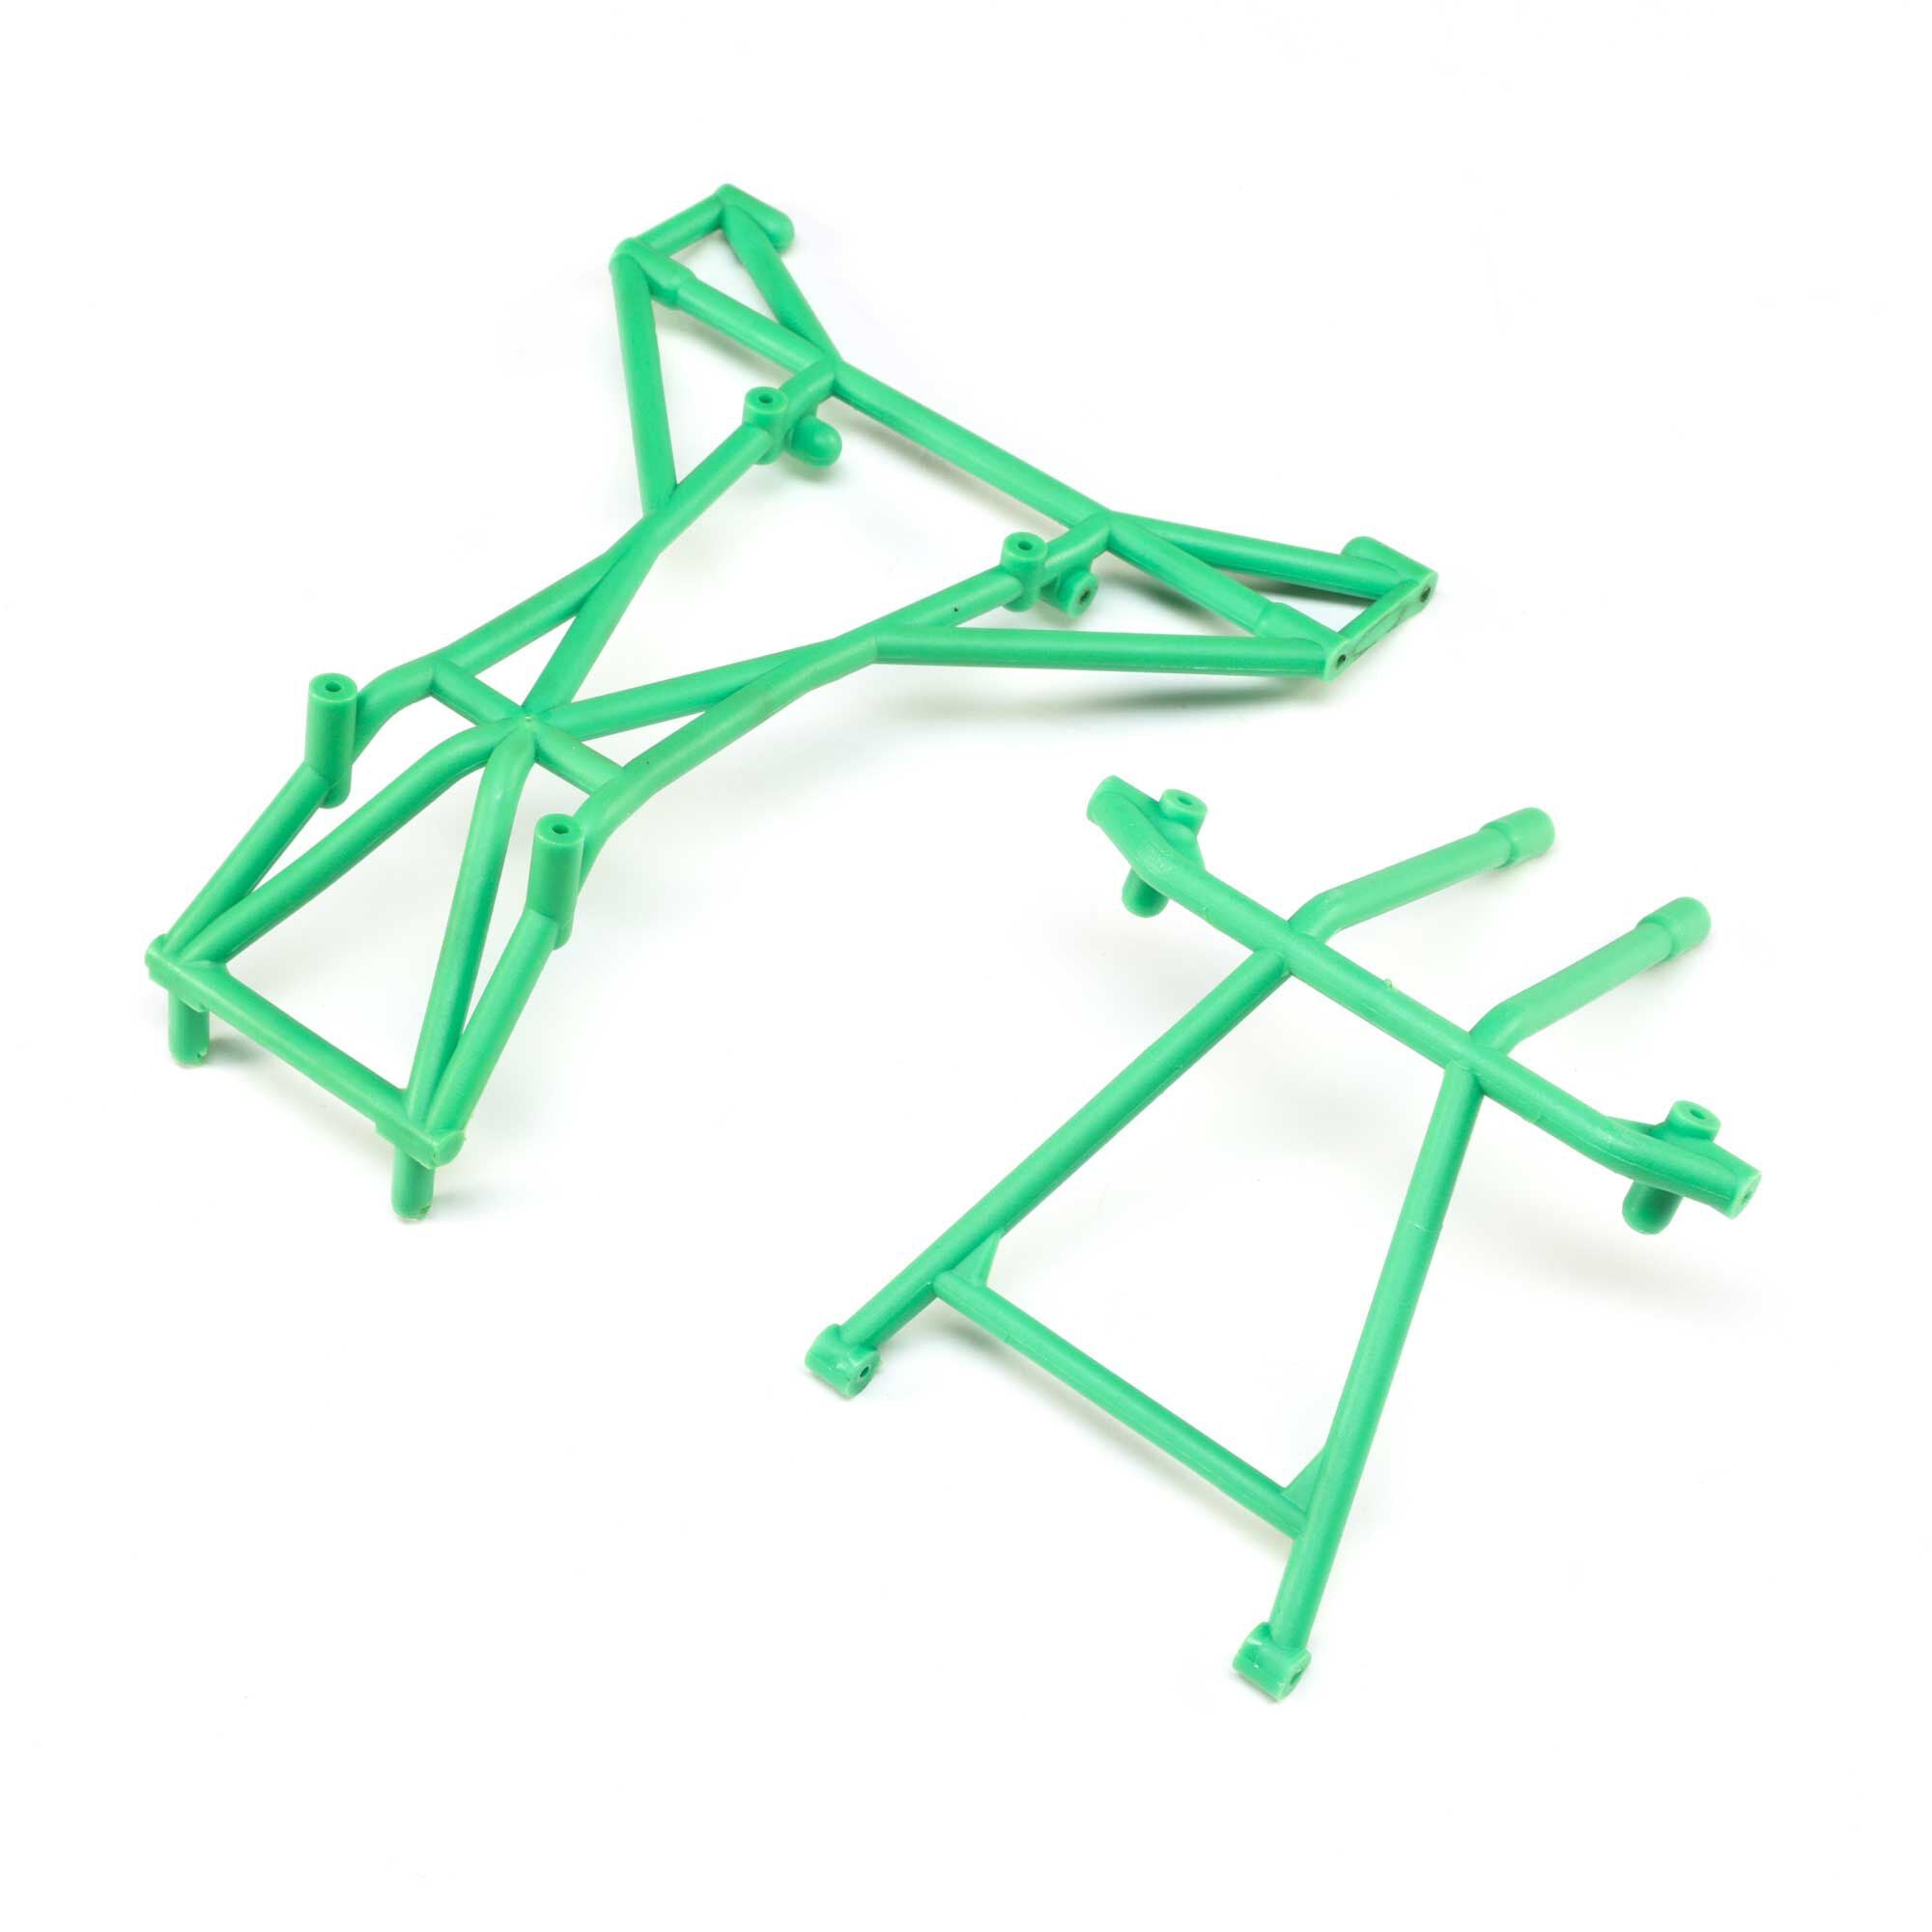 Losi Top and Upper Cage Bars, Green: LMT LOS241041